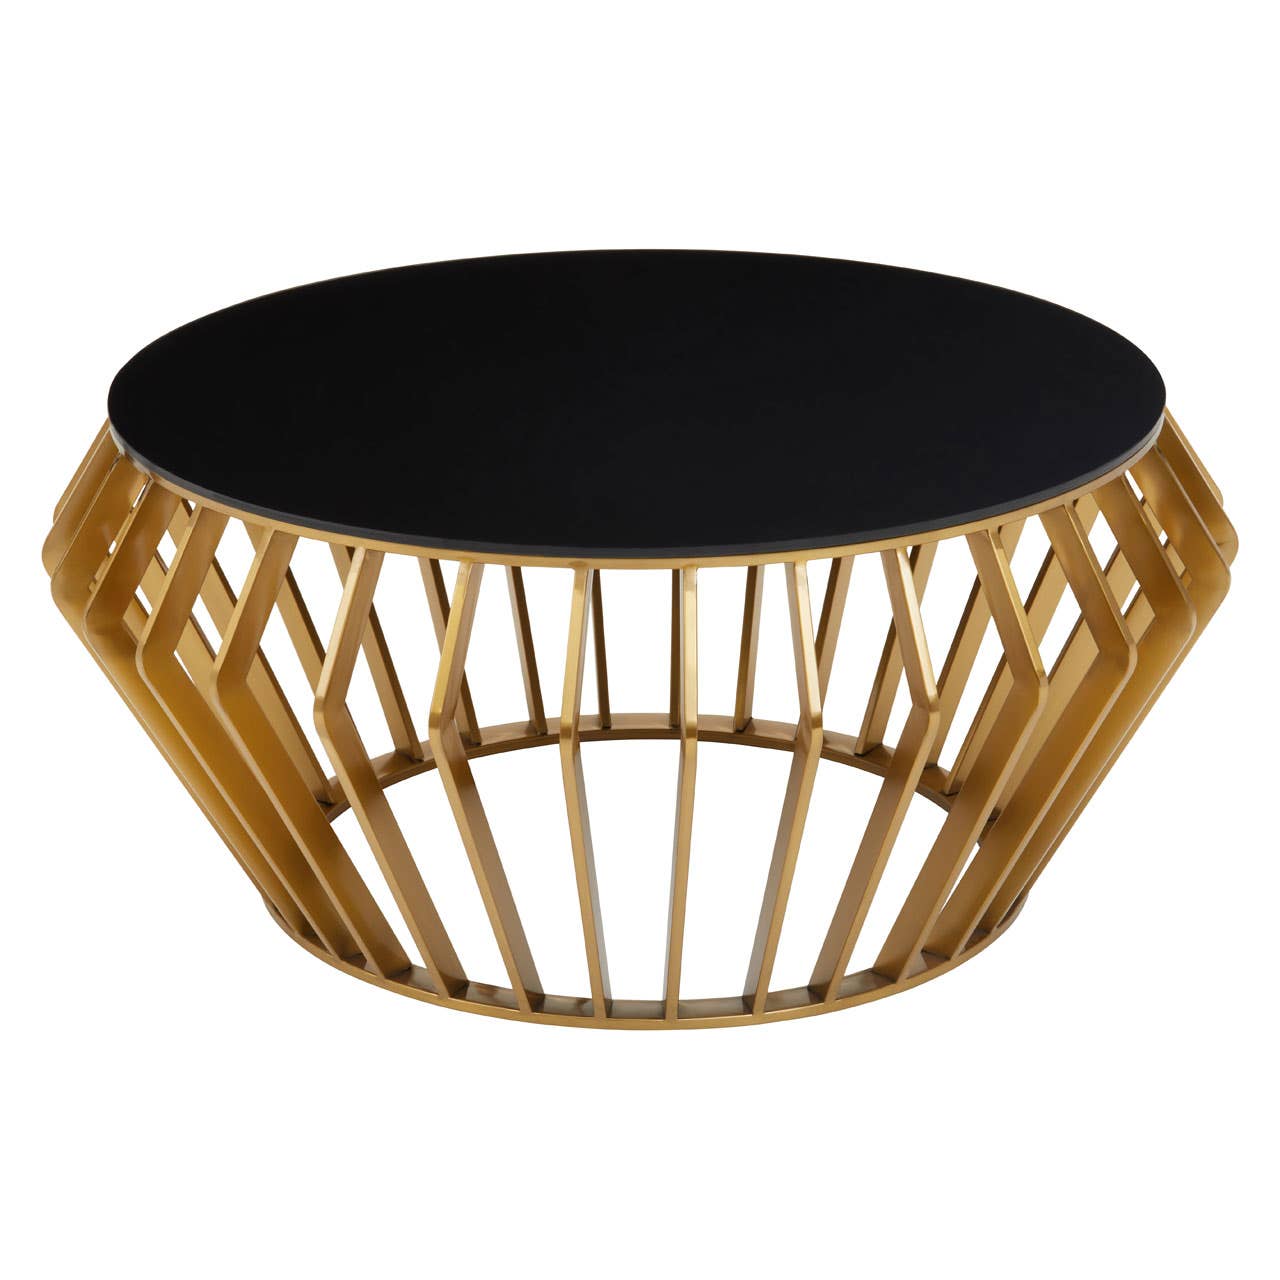 Ackley Black And Gold Round Coffee Table.